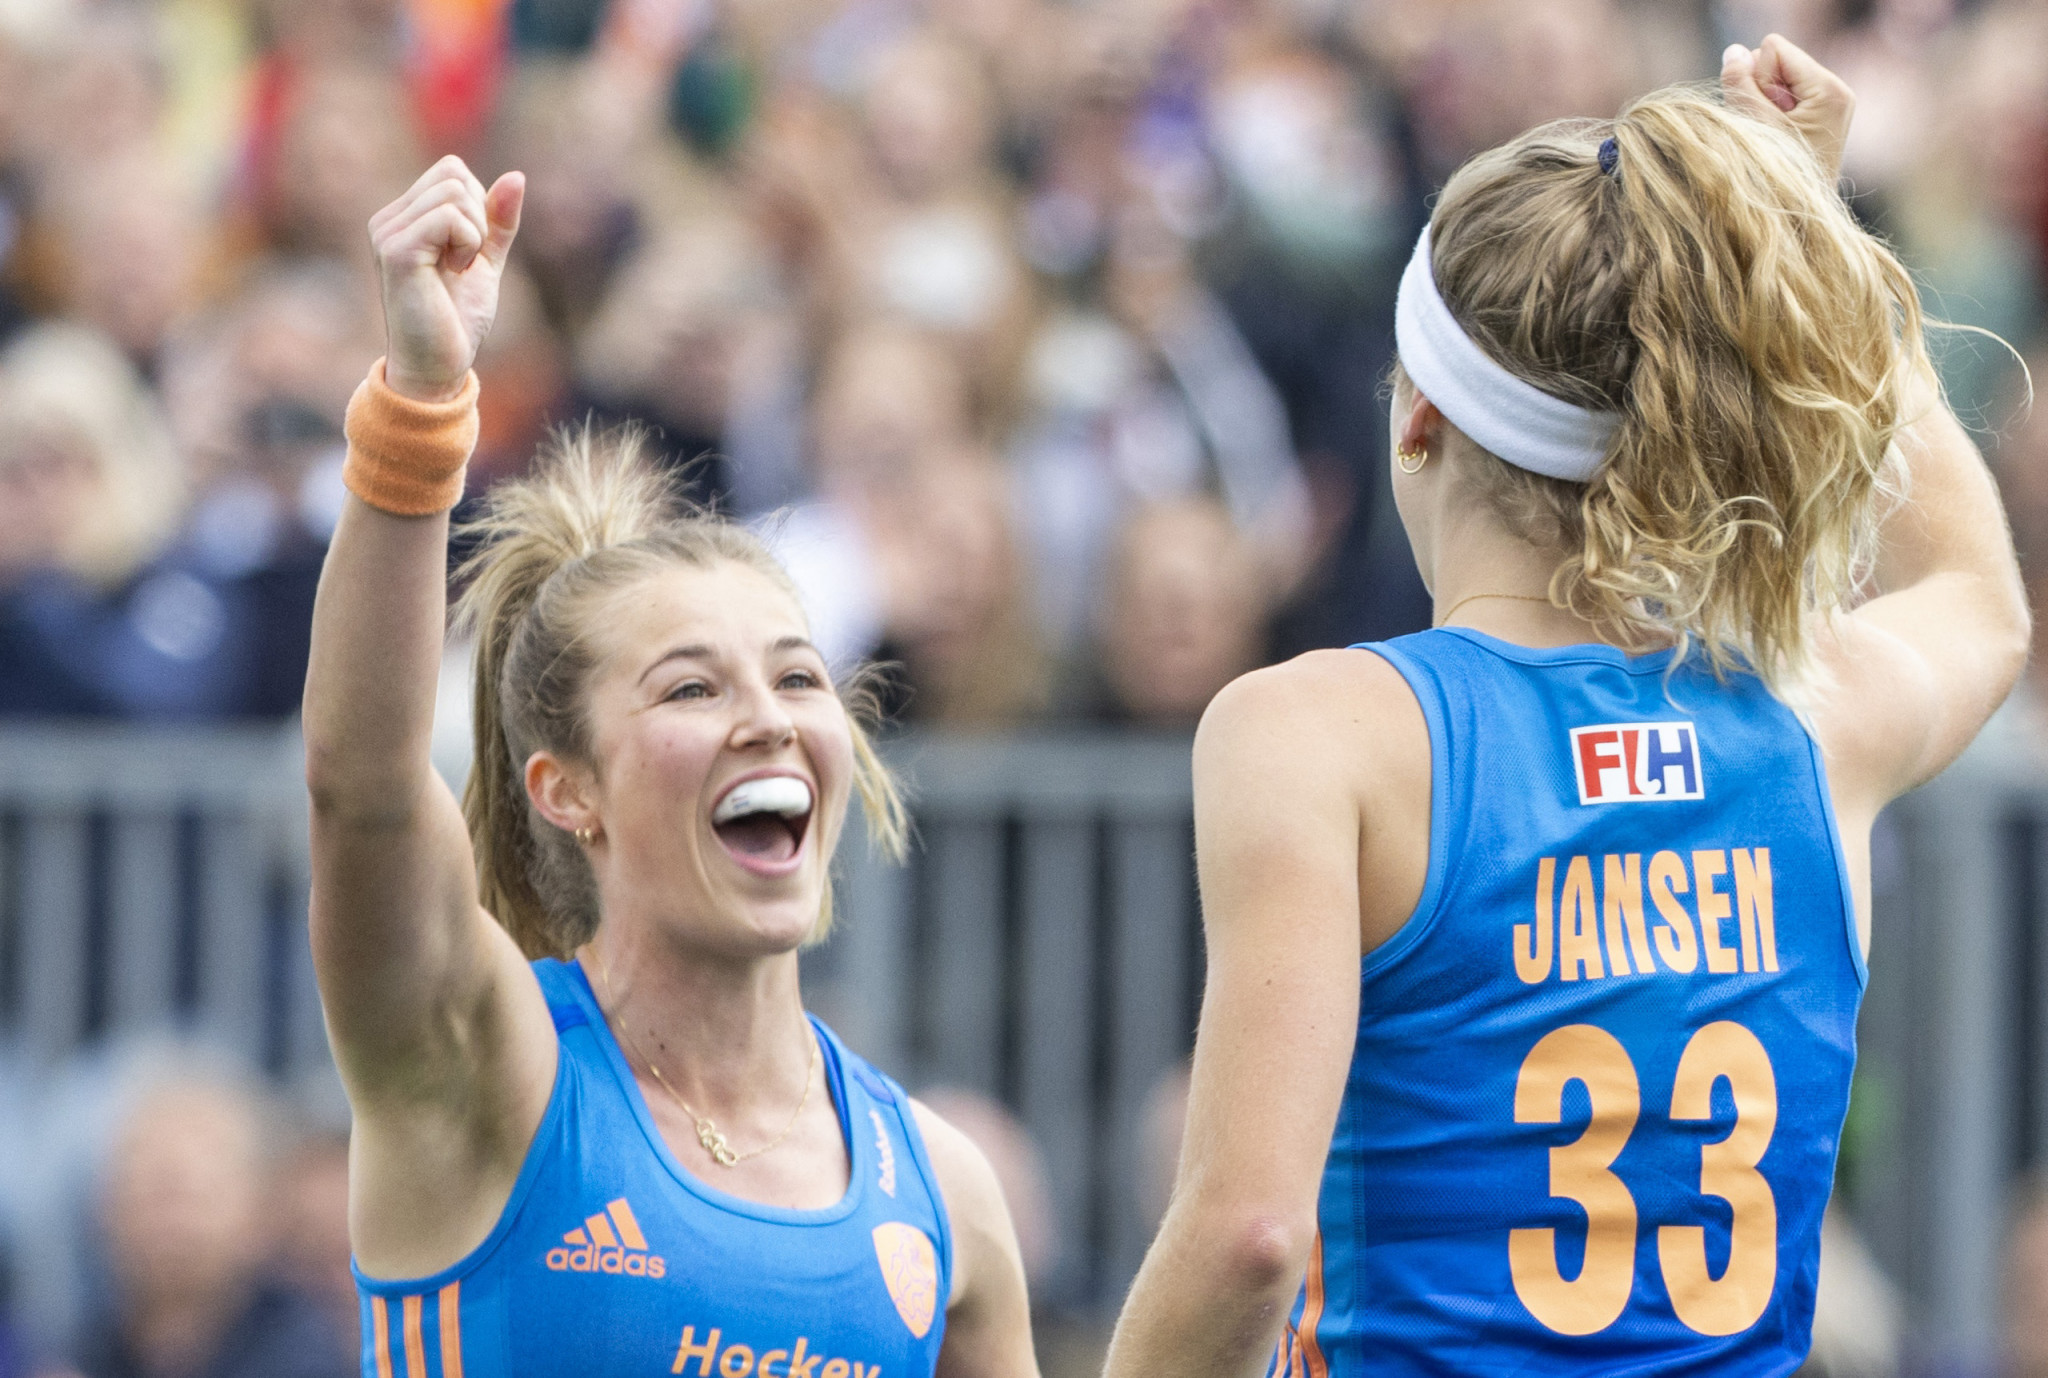 The Netherlands eye third title in a row at Women's FIH Hockey World Cup